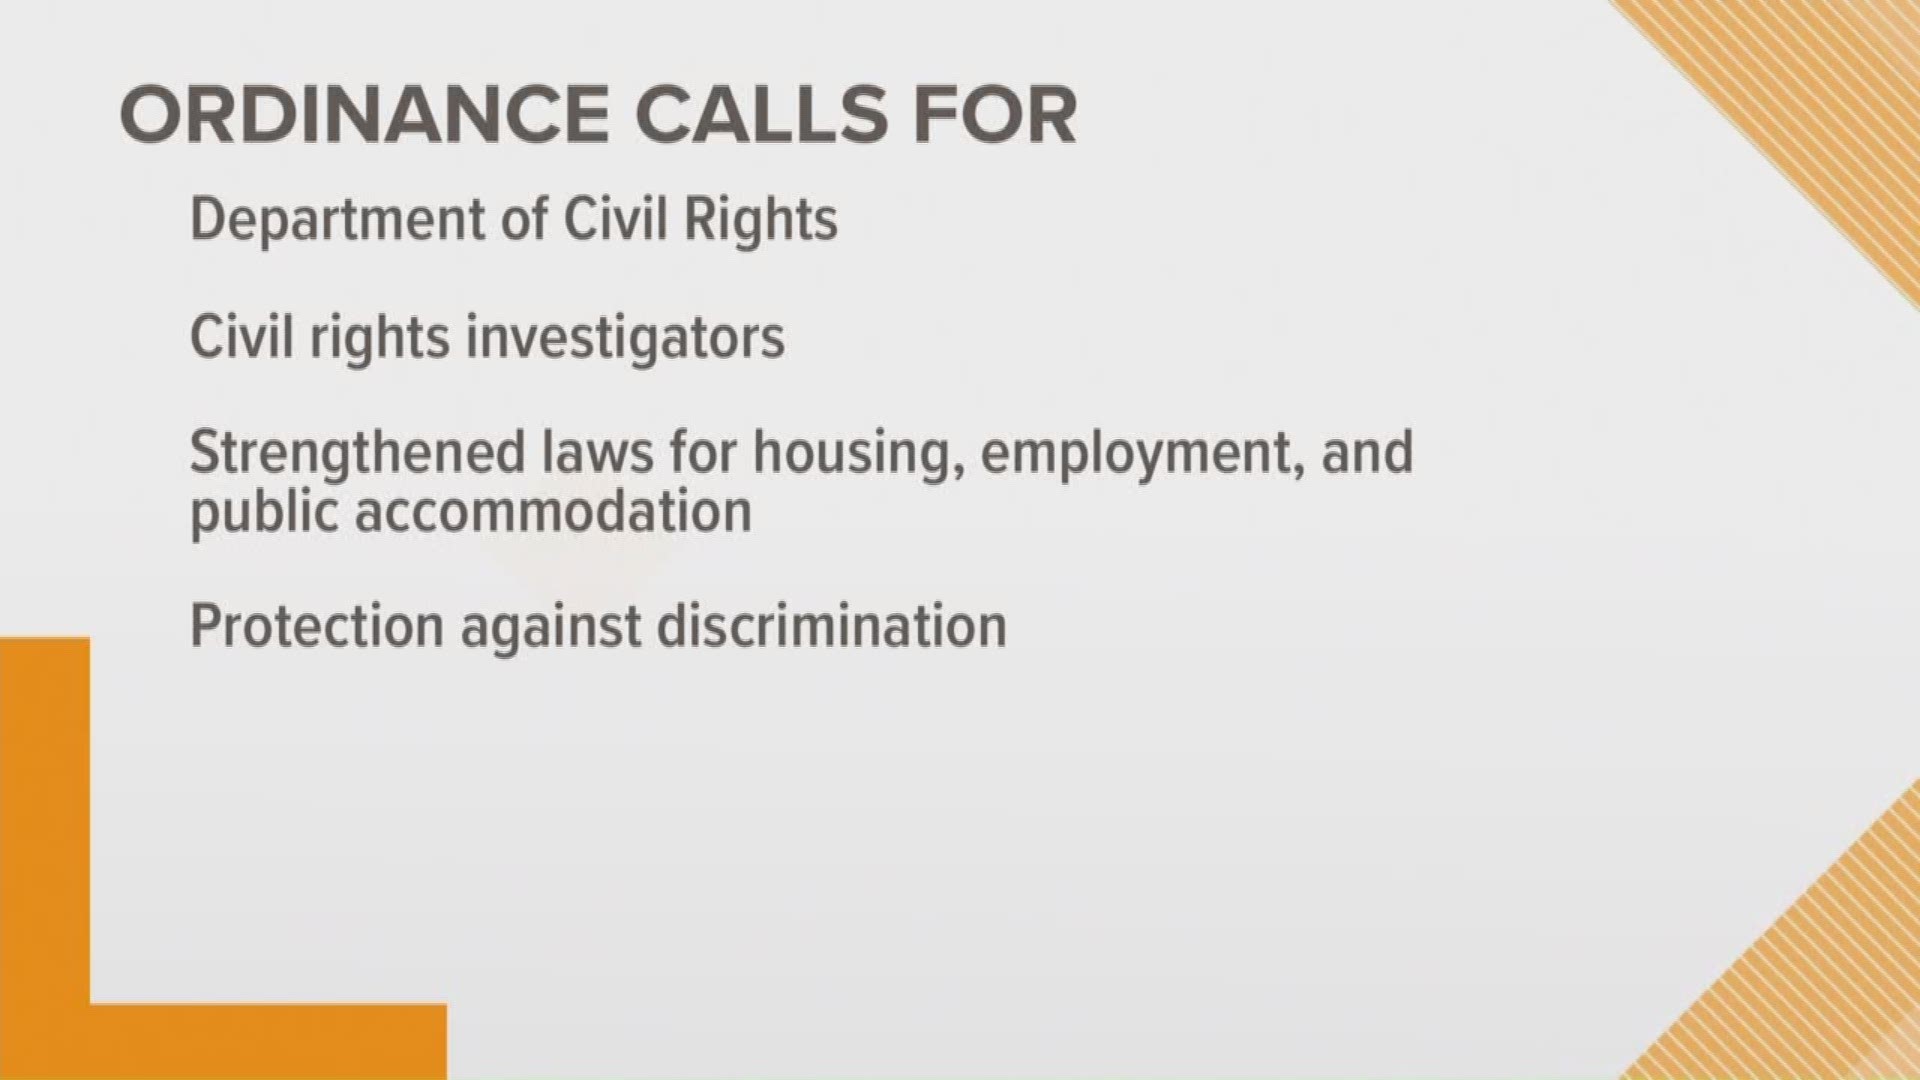 Proposed ordinance would combat discrimination